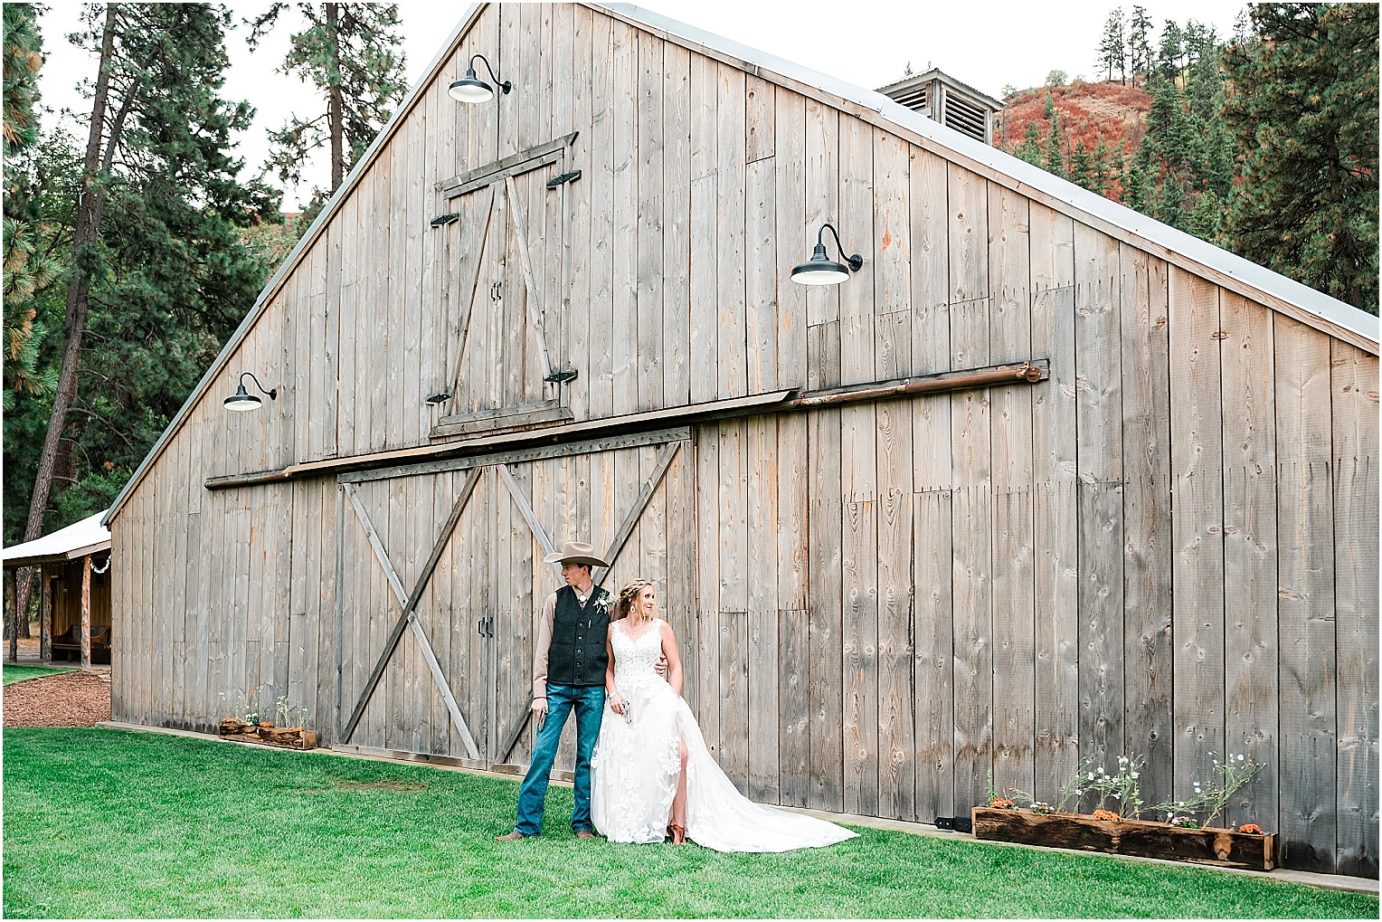 Barn at Blue Meadows Wedding Dayton WA Kyle and Malia bride and groom in front of barn